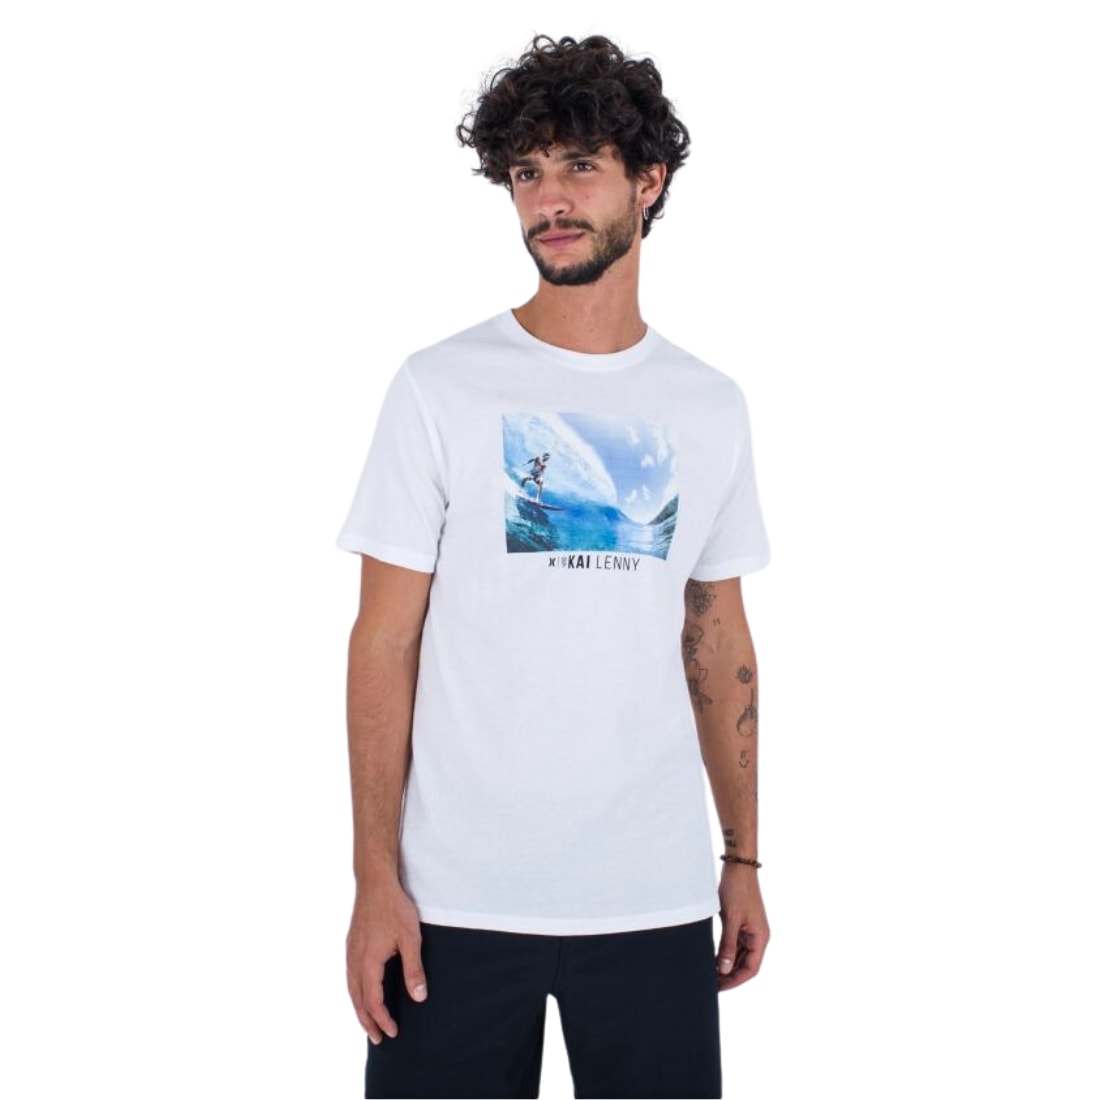 Hurley Surfing Brand Tshirt for Men and Women New and Quality